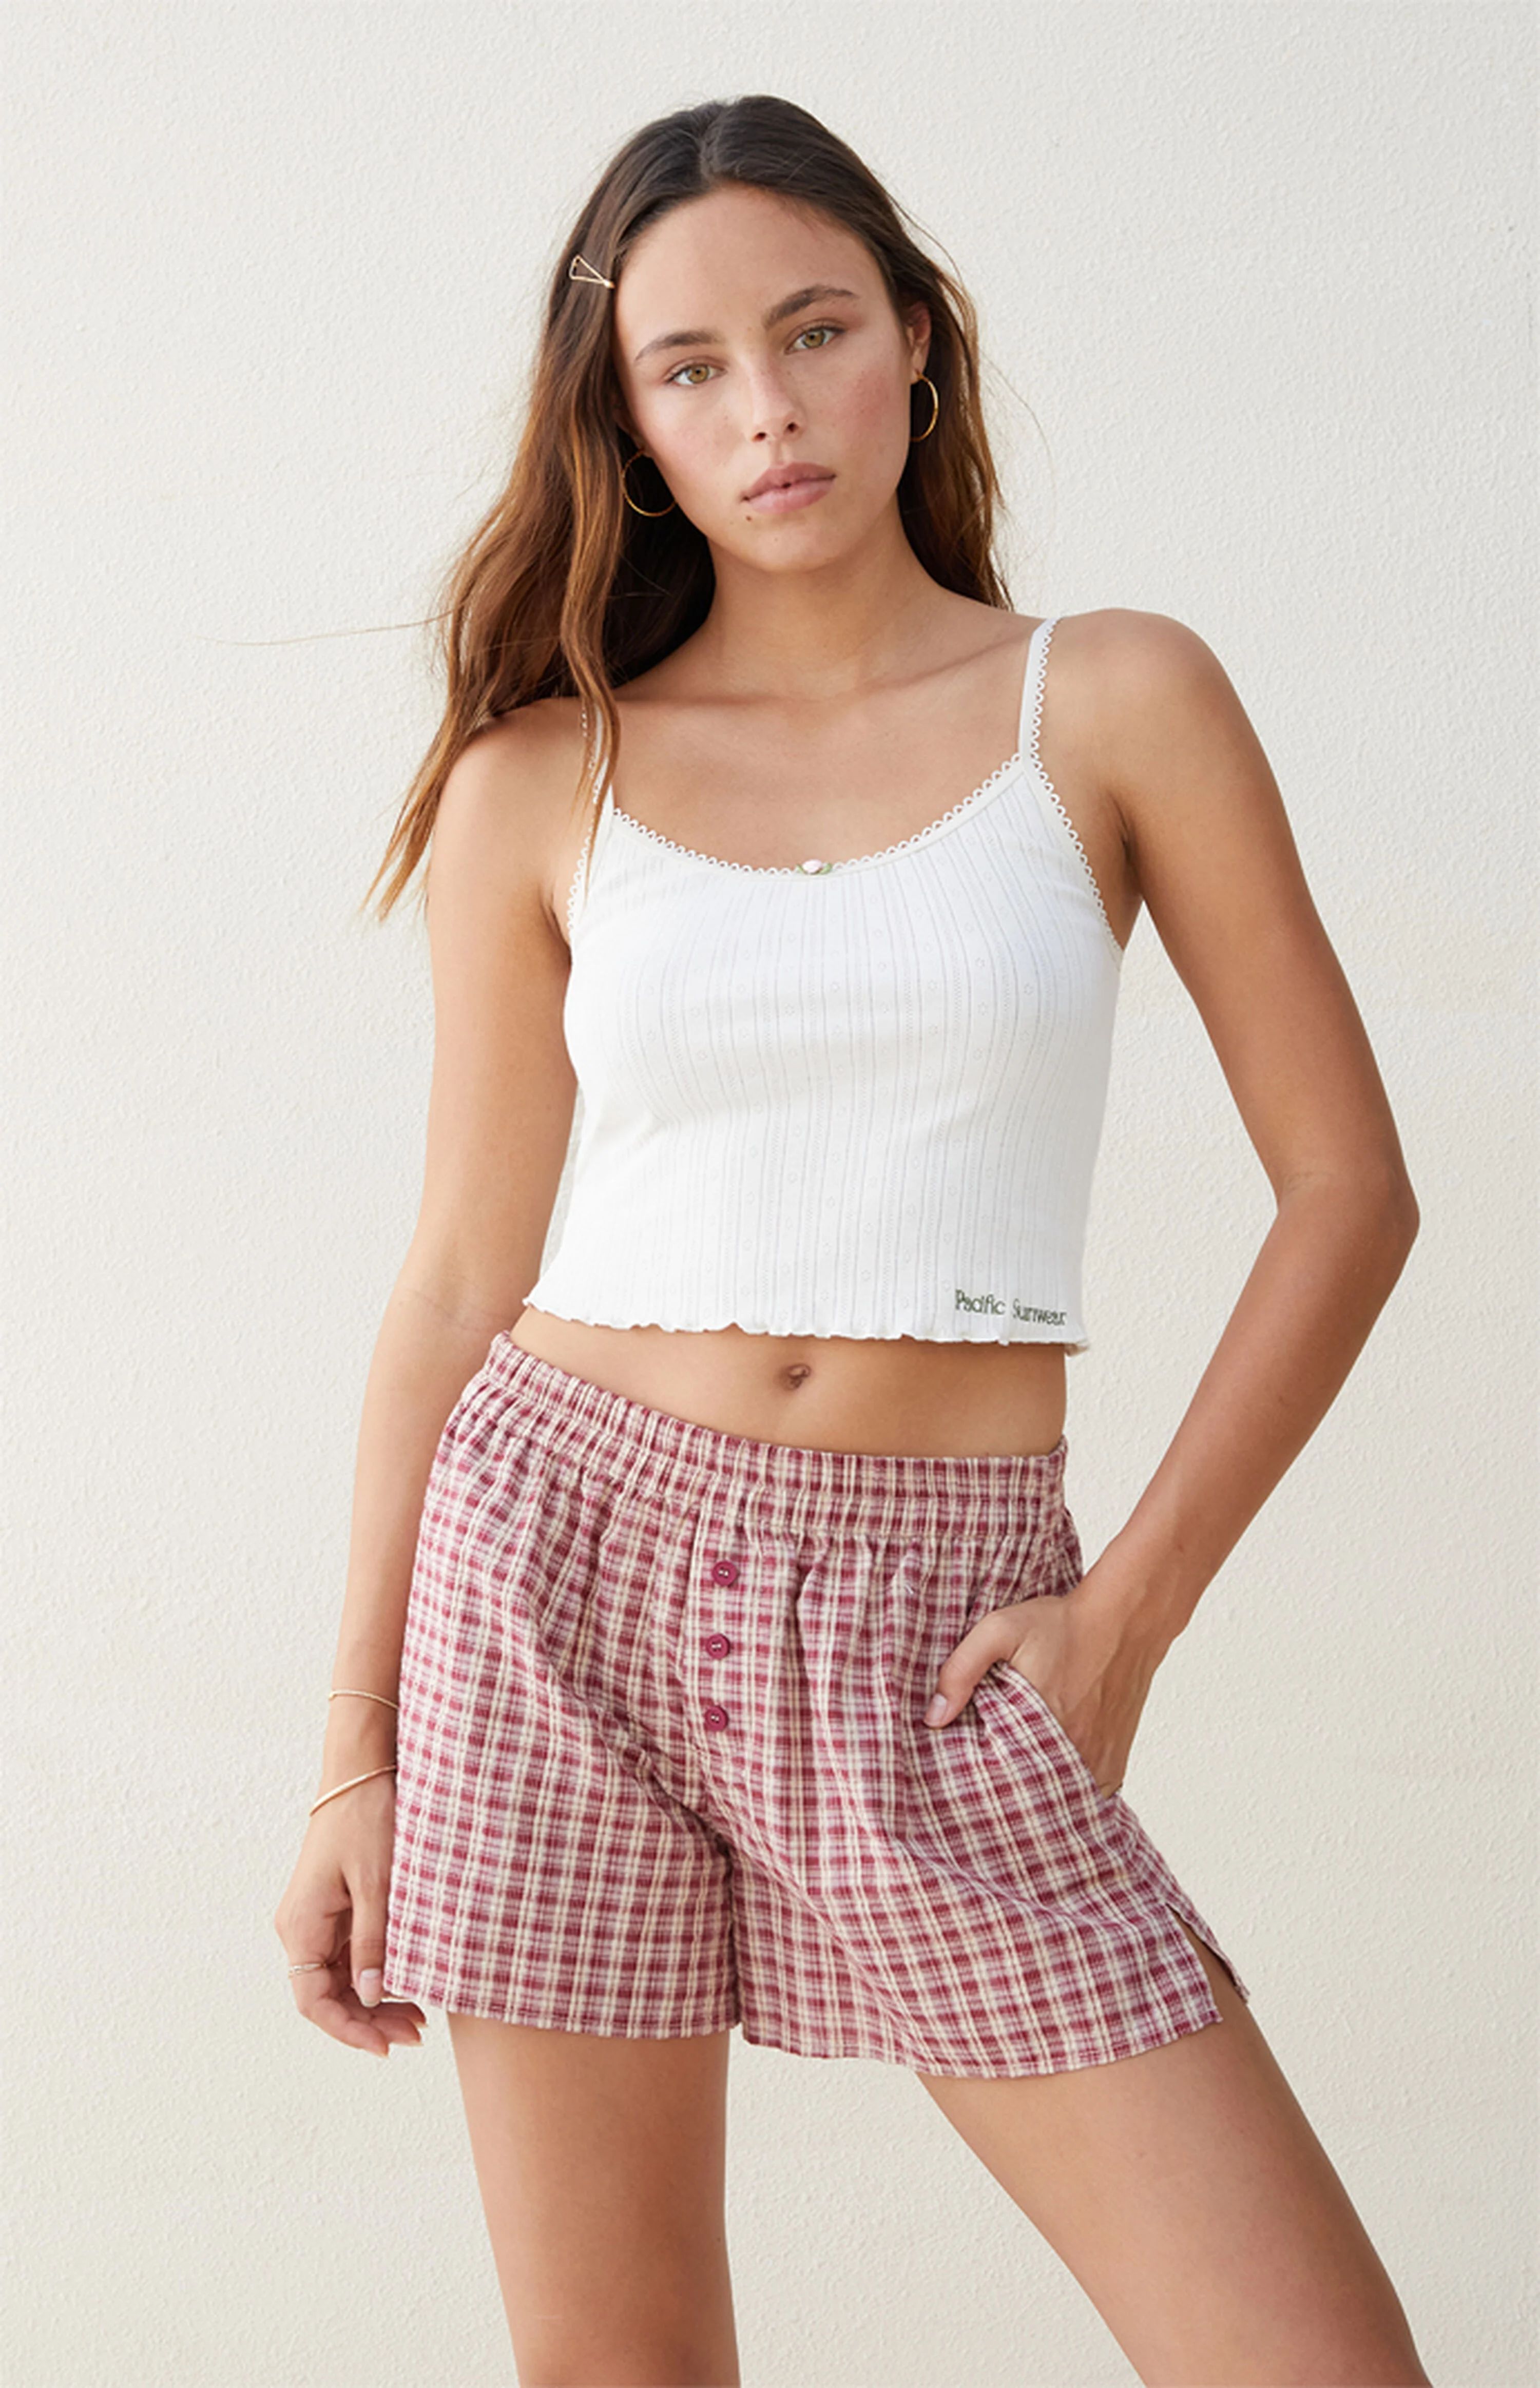 Beverly & Beck Plaid Boxer Shorts | PacSun